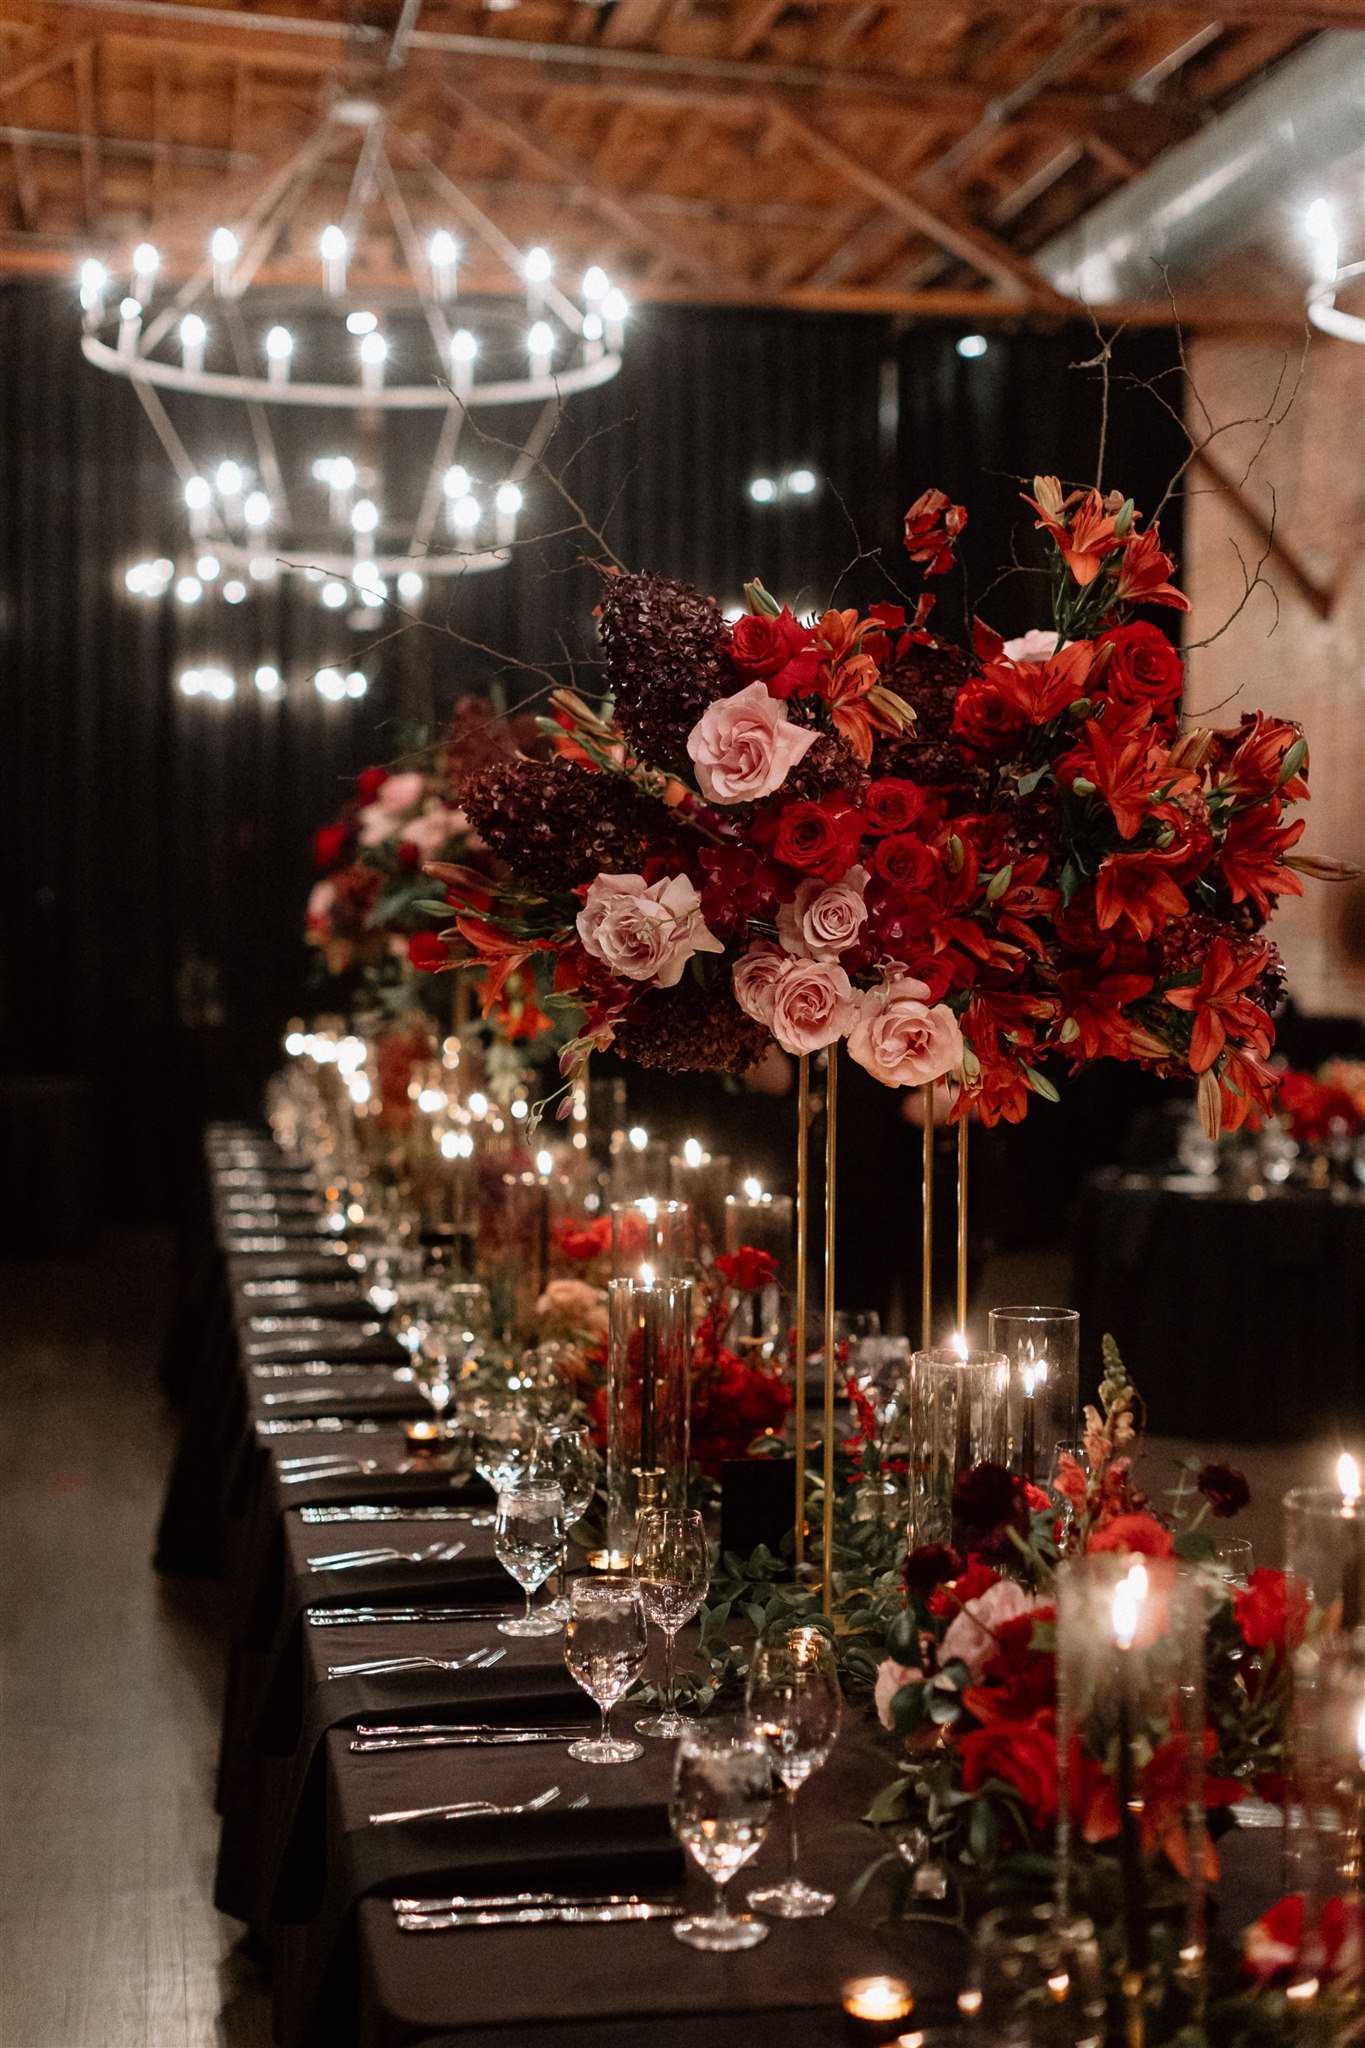  A view down a long black linen table set for a wedding reception dinner. Down the center of the table are tall candlesticks and small red floral centerpieces, interspersed with tall gold stands of large red and pink floral centerpieces. The table st